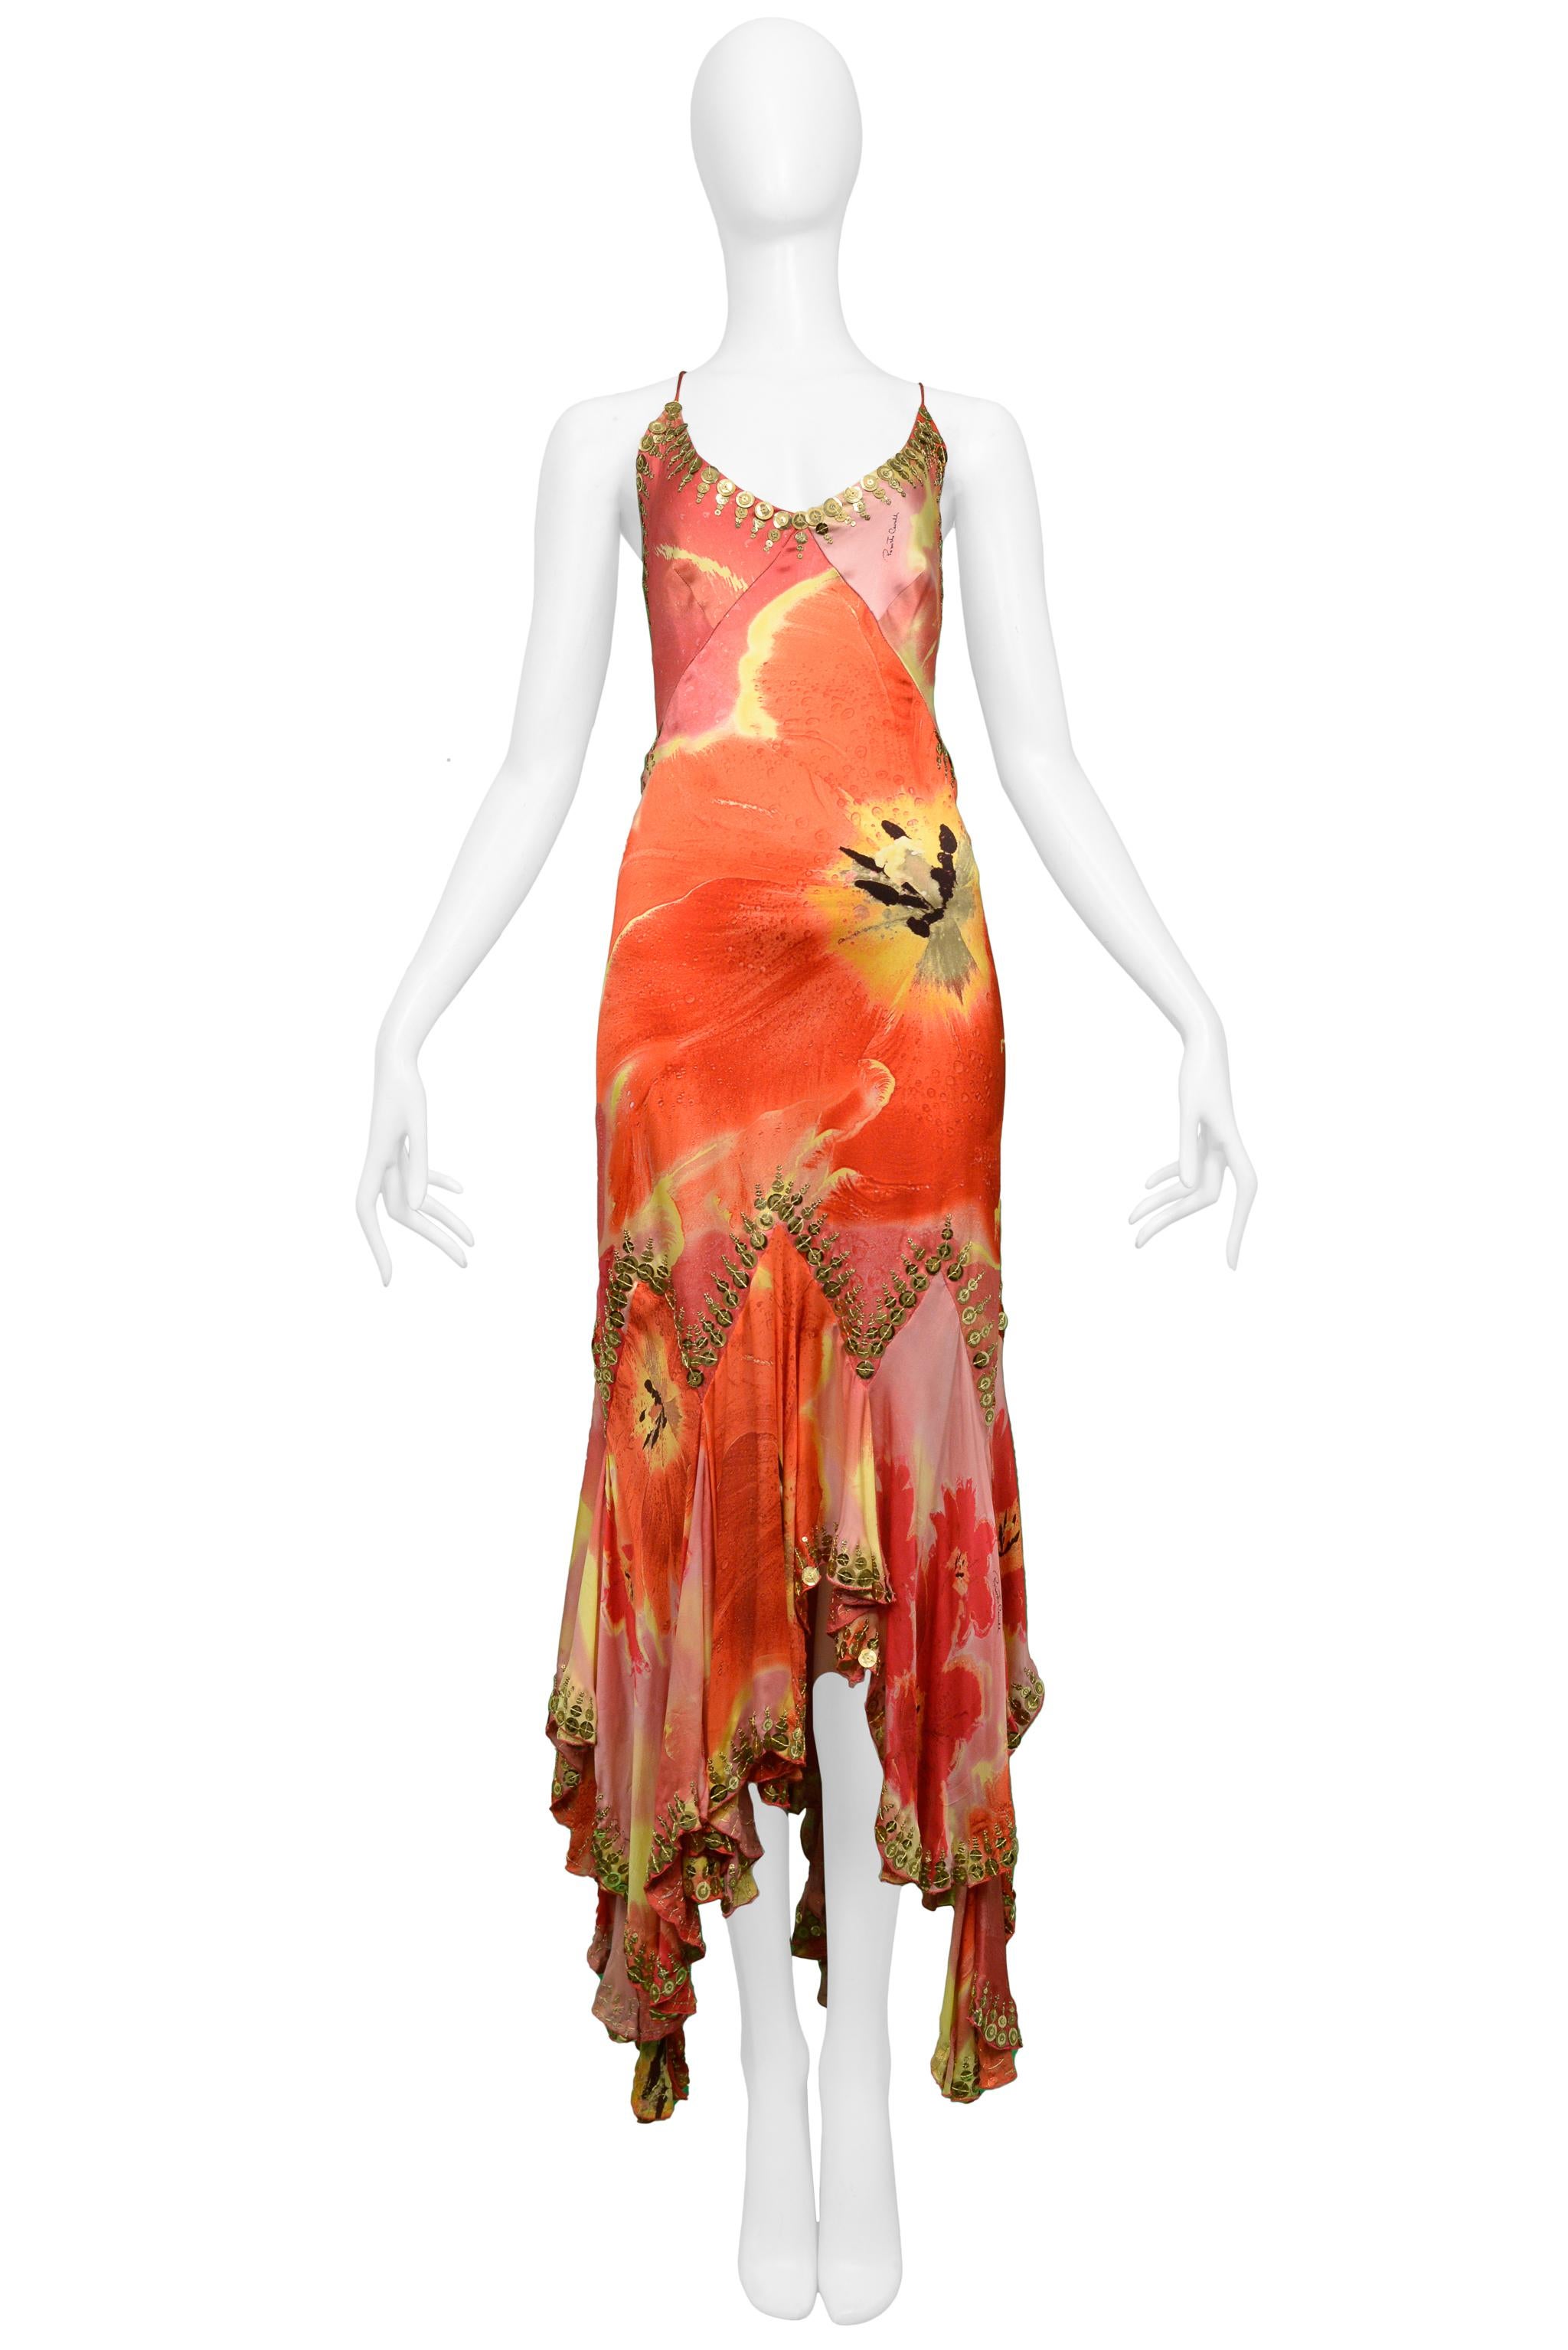 Resurrection Vintage is excited to present a vintage Roberto Cavalli satin slip dress featuring a halter top front, a keyhole back with ties, an abstract floral pink, yellow, red, and orange print, ruffles, gold stitching, sequins, and paillettes.